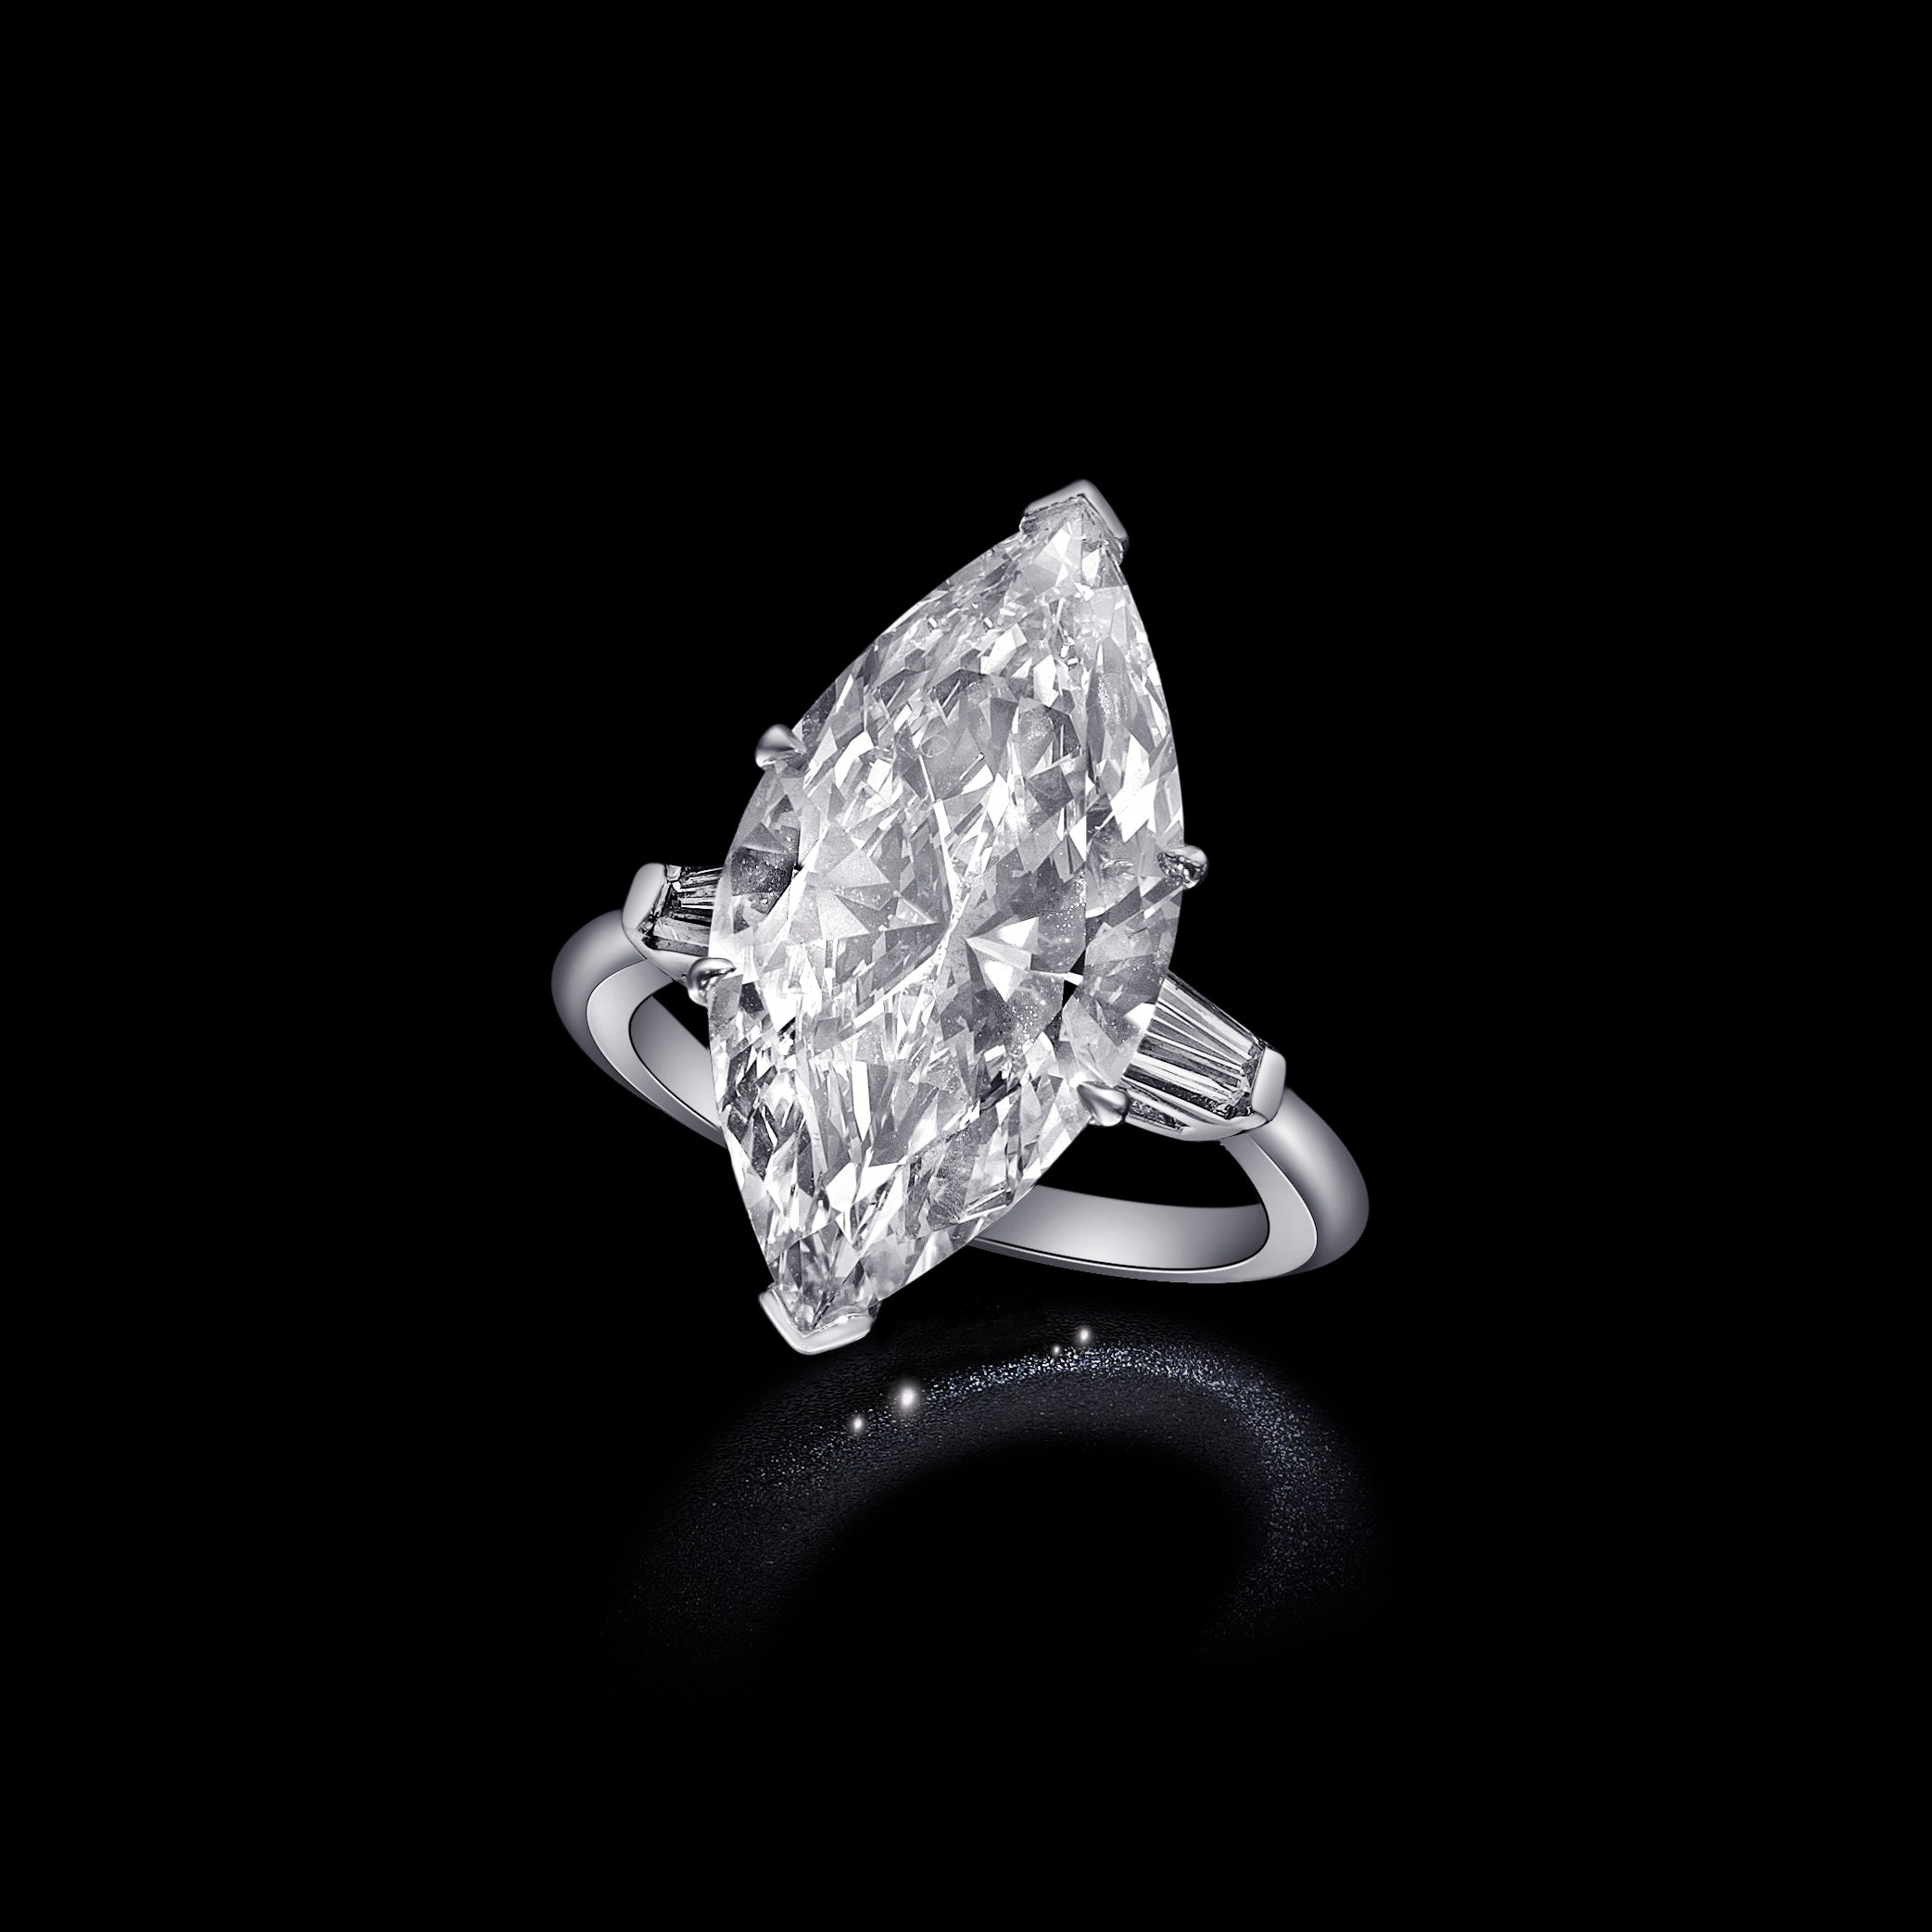 Marquise Diamond Ring with Side Stones - 7.29ct TW